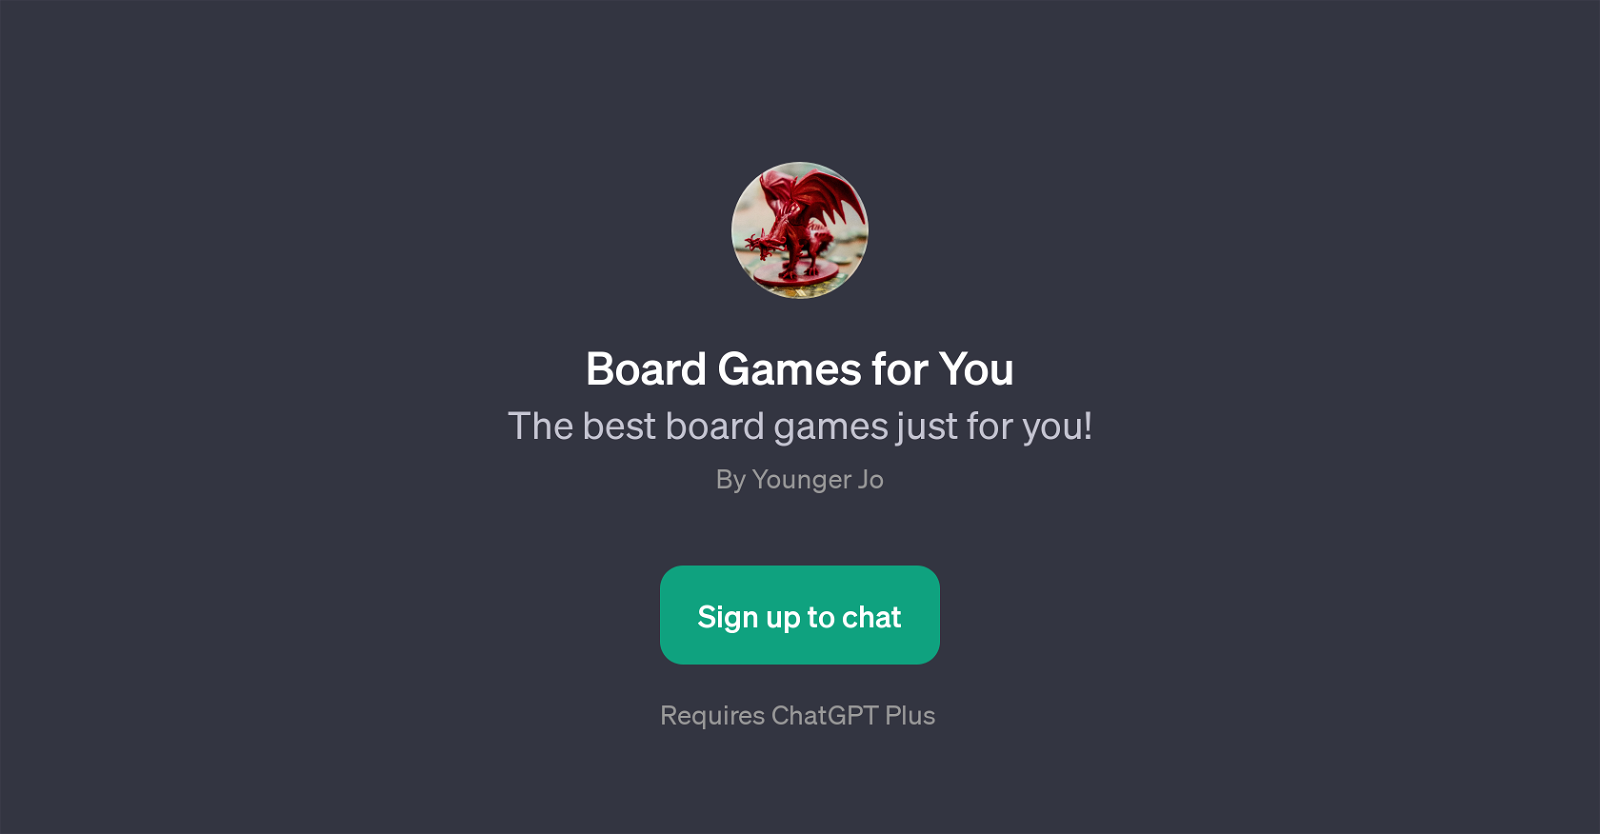 Board Games for You website